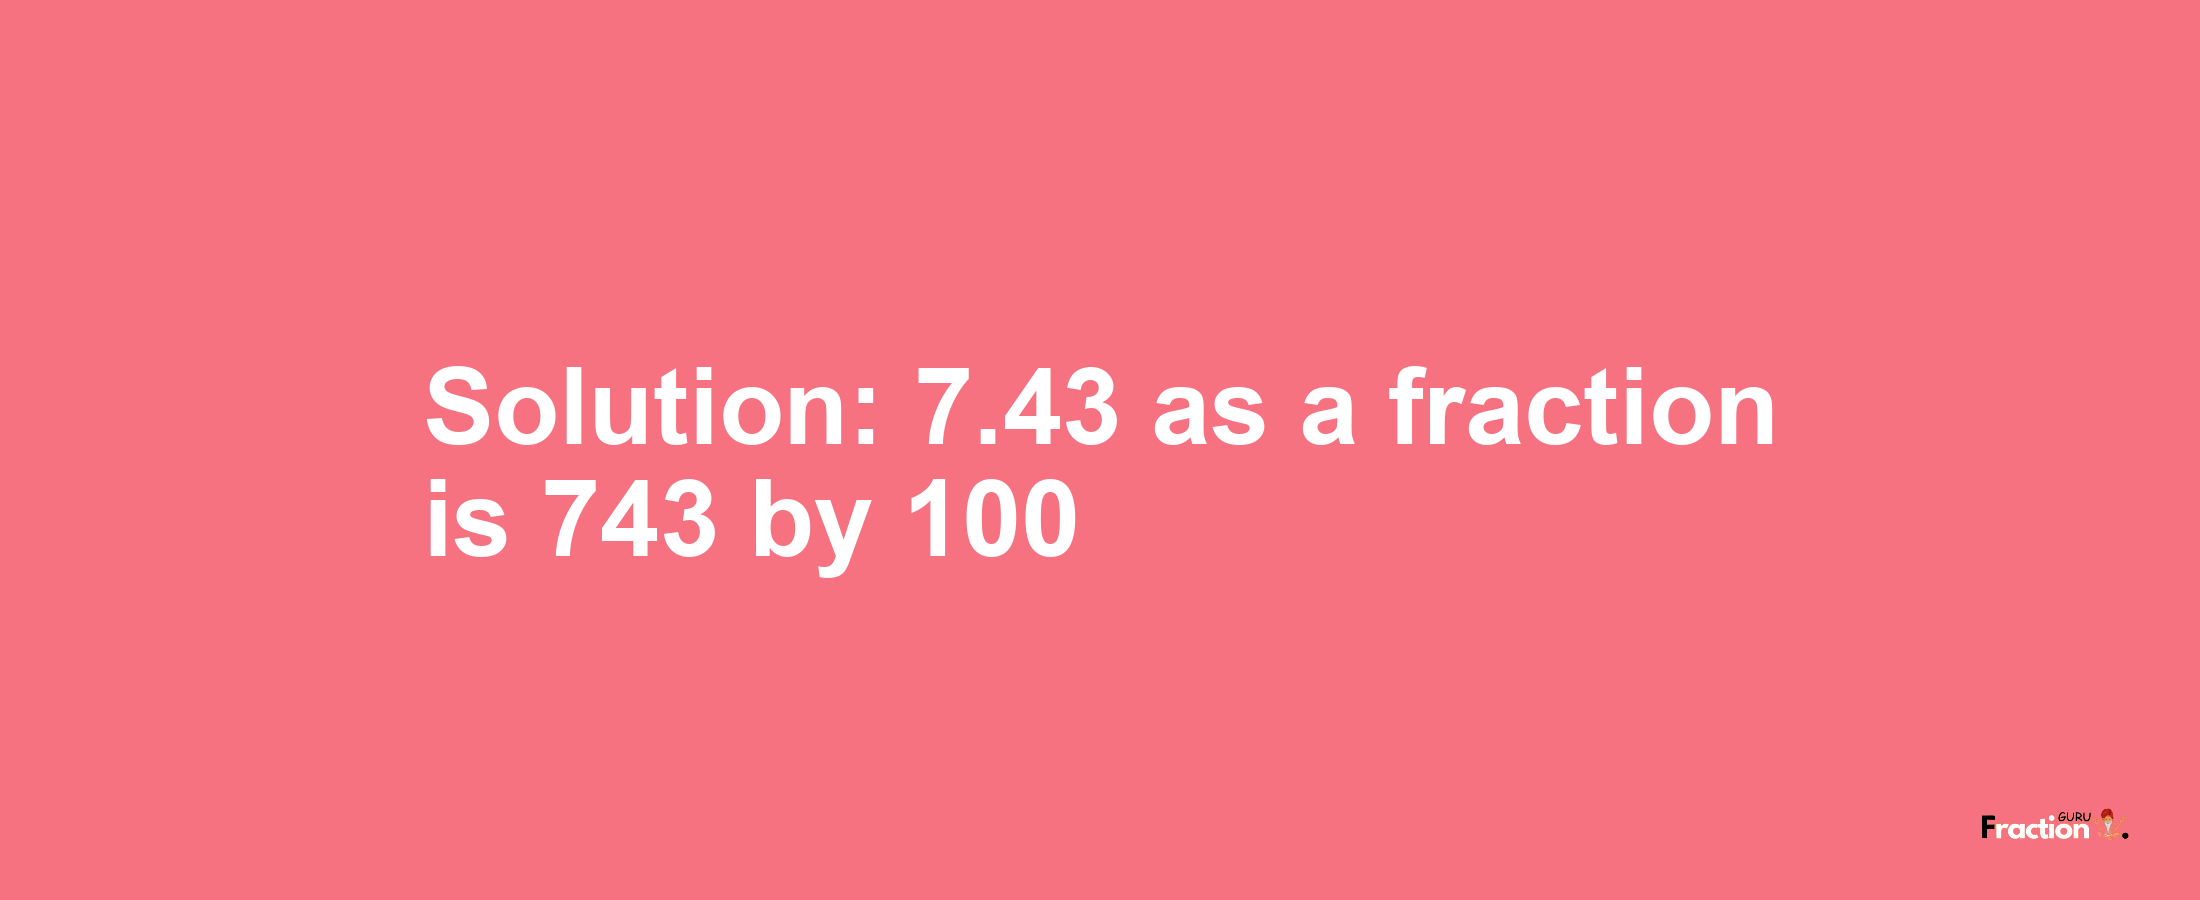 Solution:7.43 as a fraction is 743/100